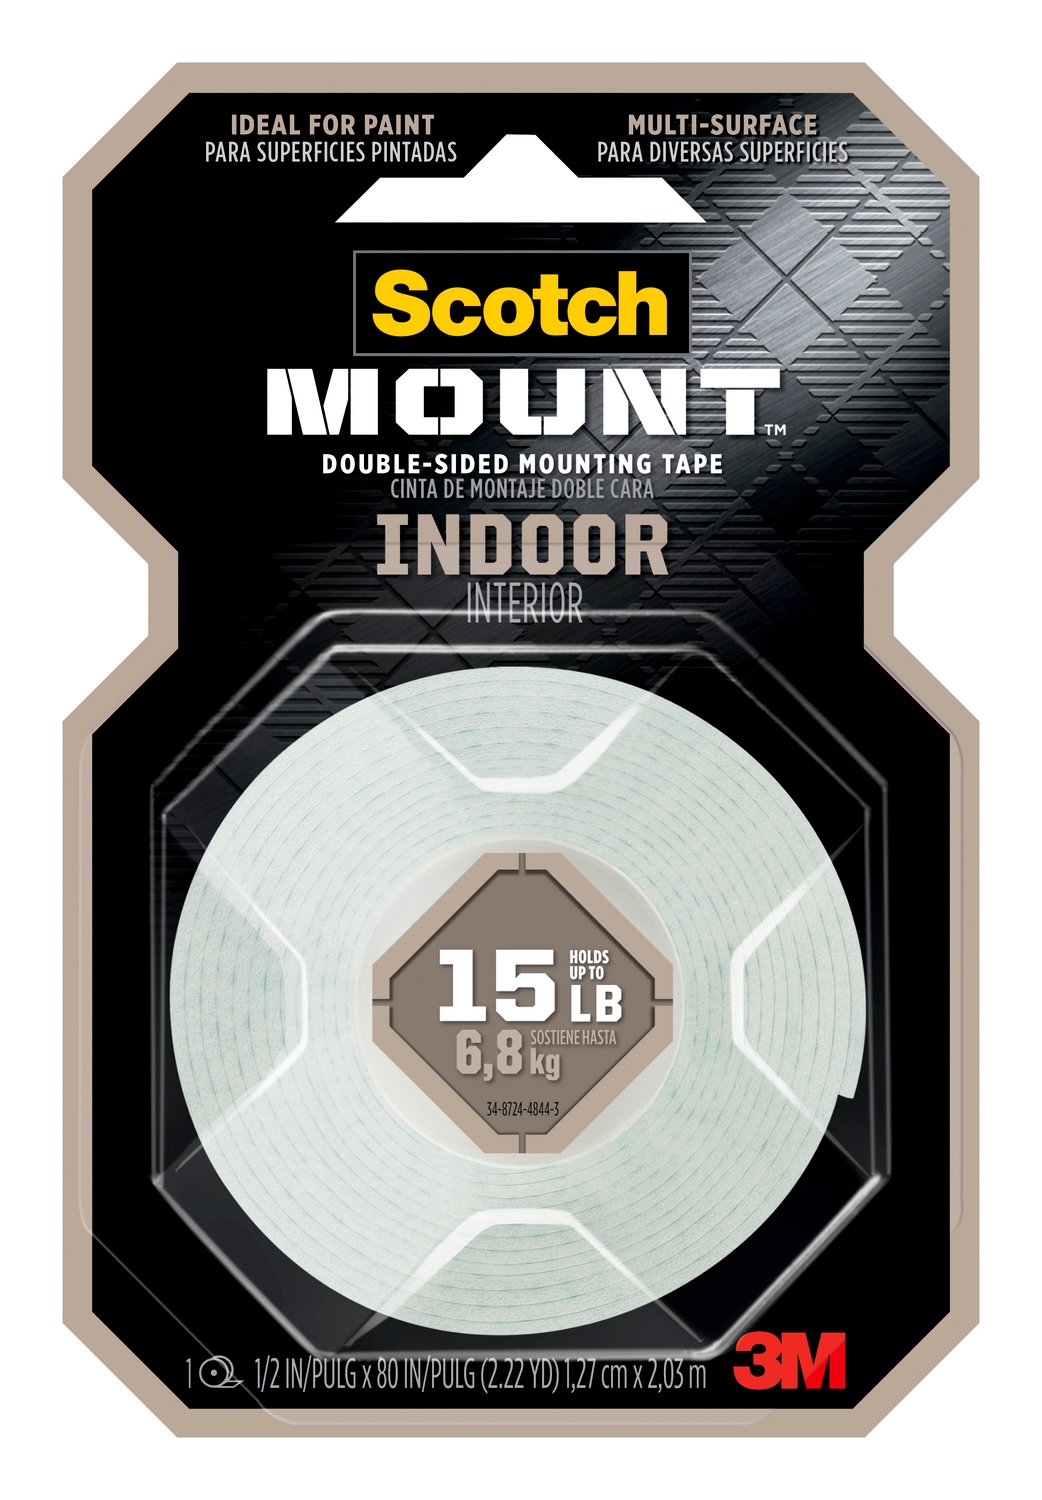 7100217213 - Scotch-Mount Indoor Double-Sided Mounting Tape 110H-DC, 1/2 in x 80 in